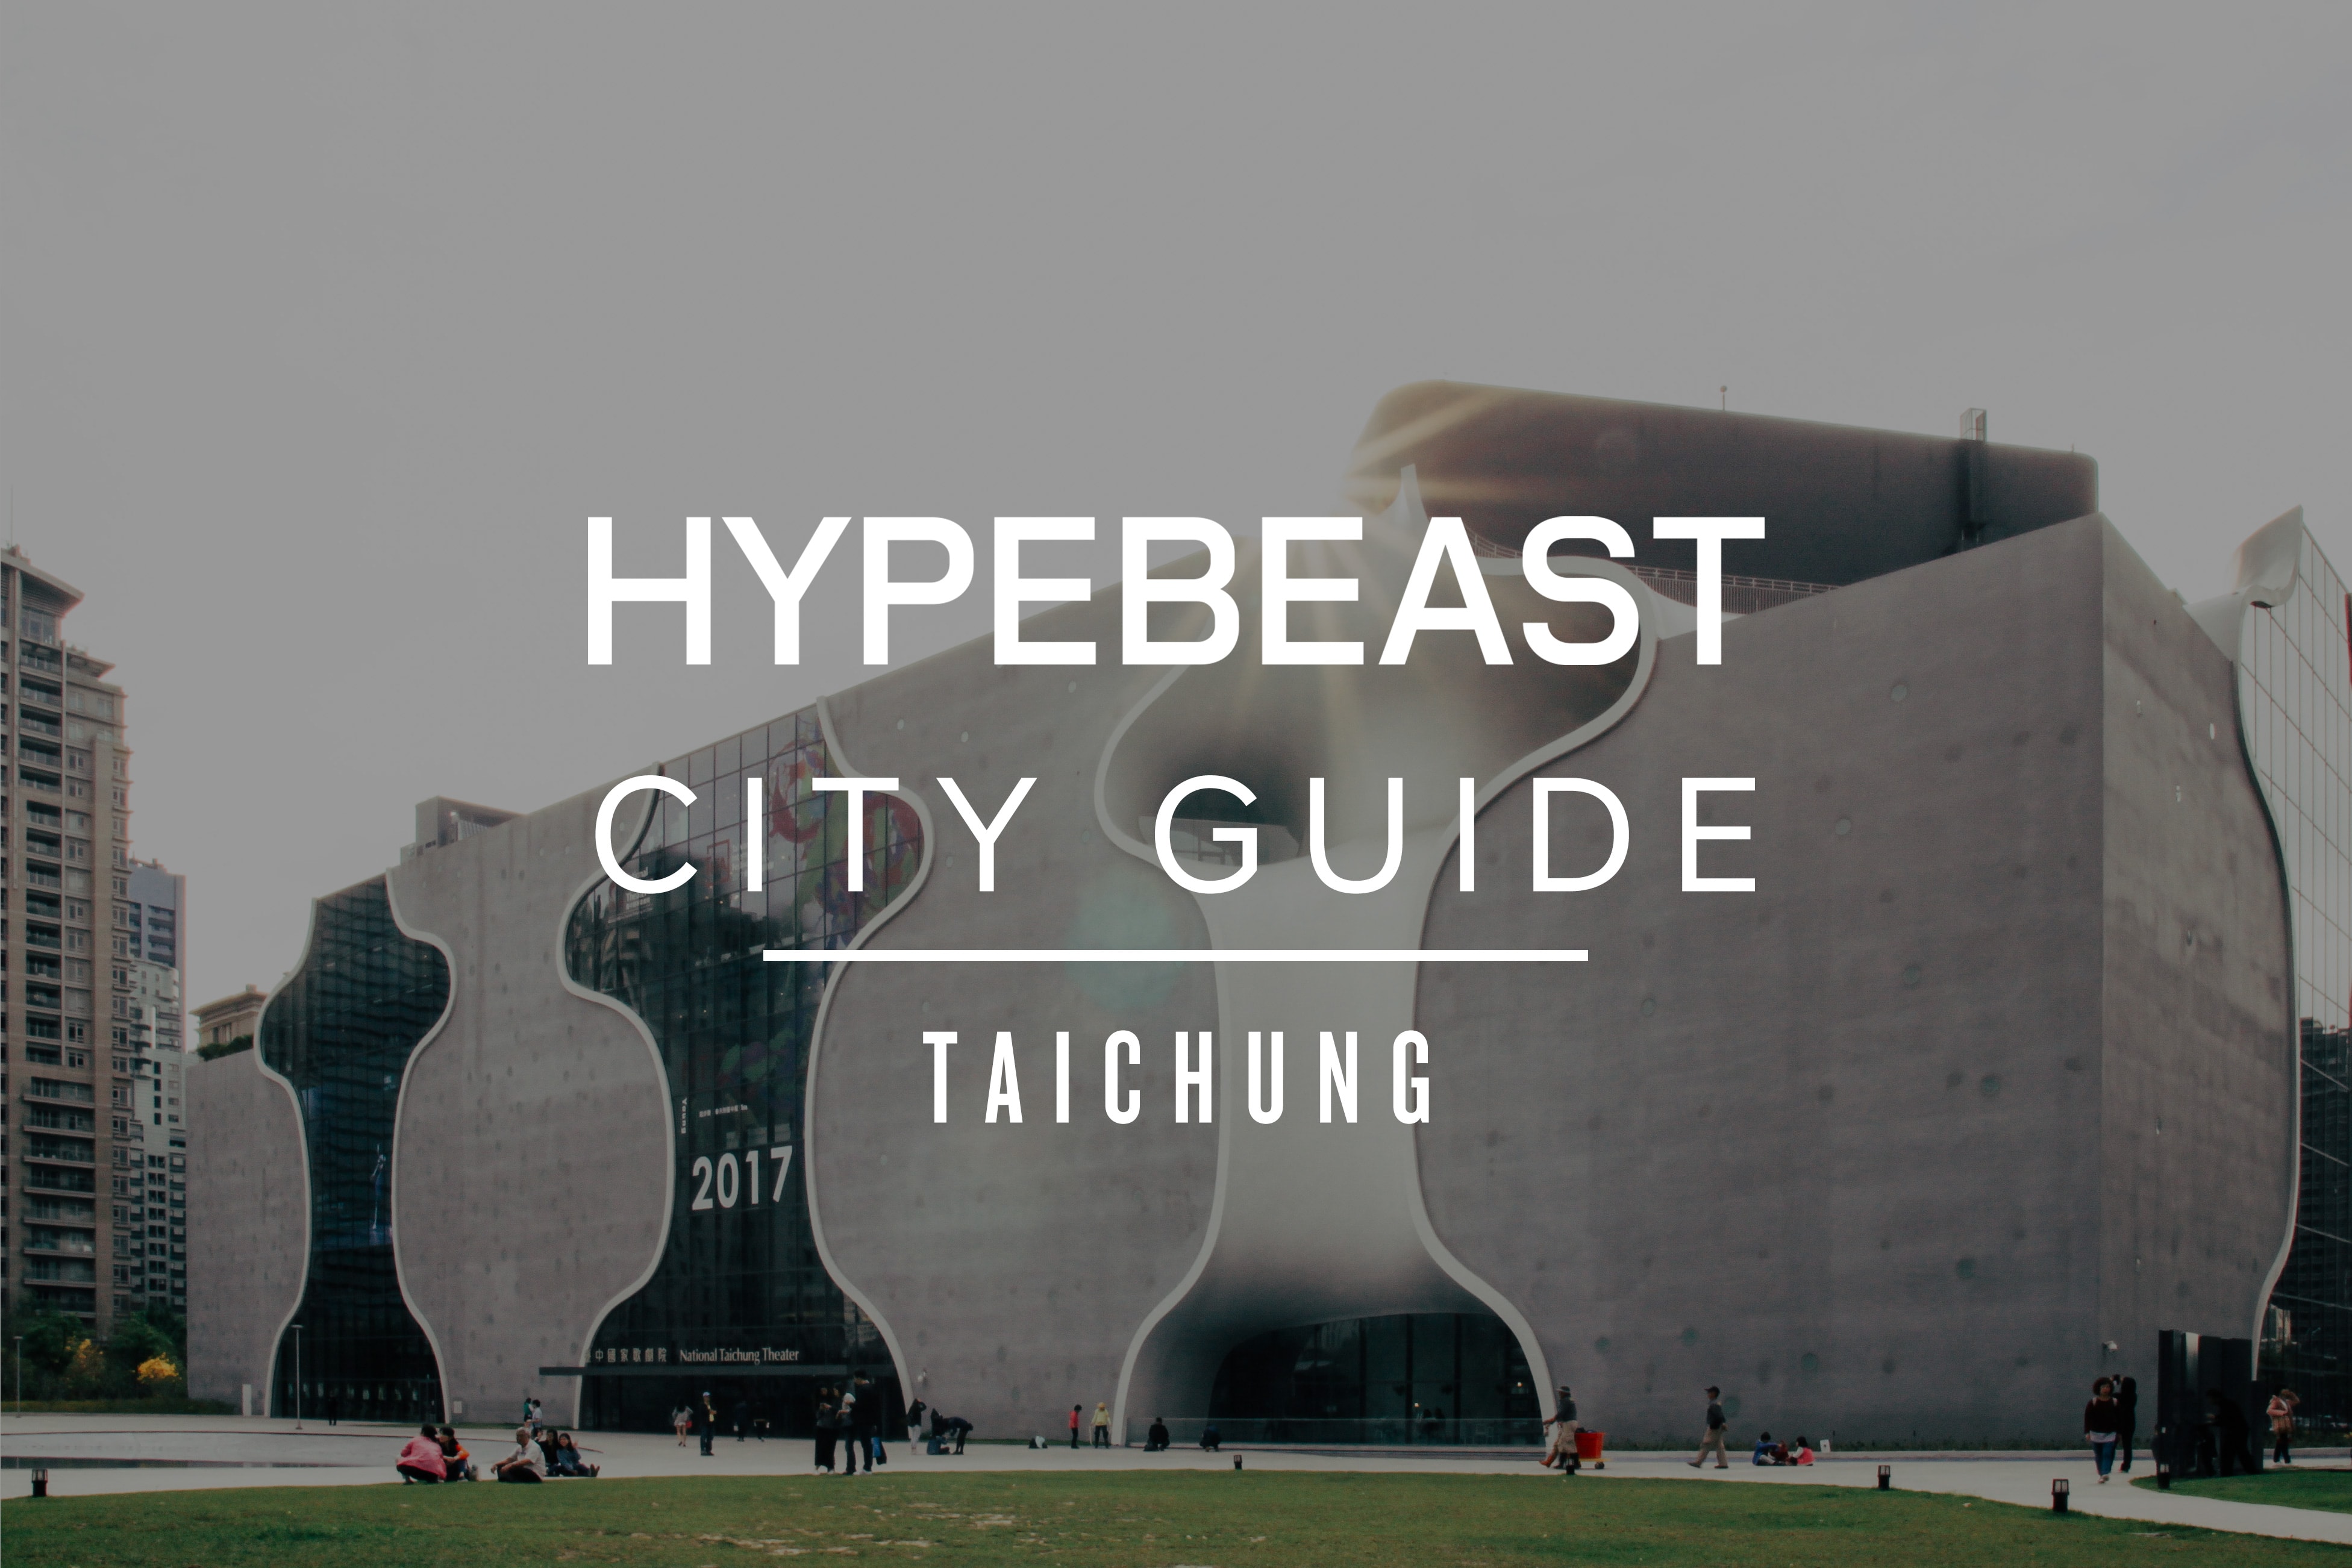 HYPEBEAST City Guide to Taichung